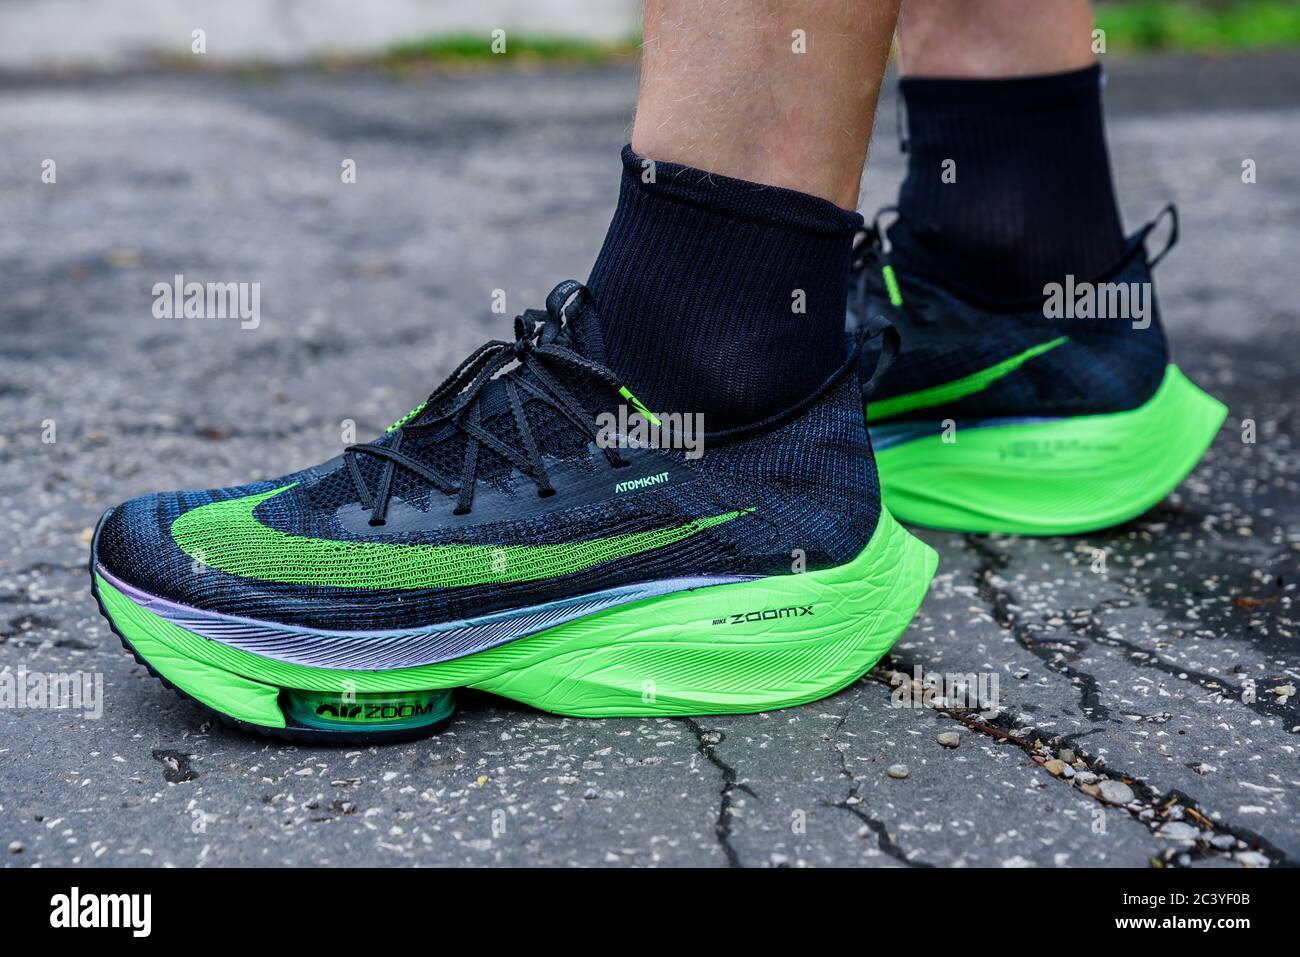 ROME, JUNE 23. 2020: Nike running shoes ALPHAFLY Controversial green athletics shoe on legs of professional athlete on the Stock Photo - Alamy